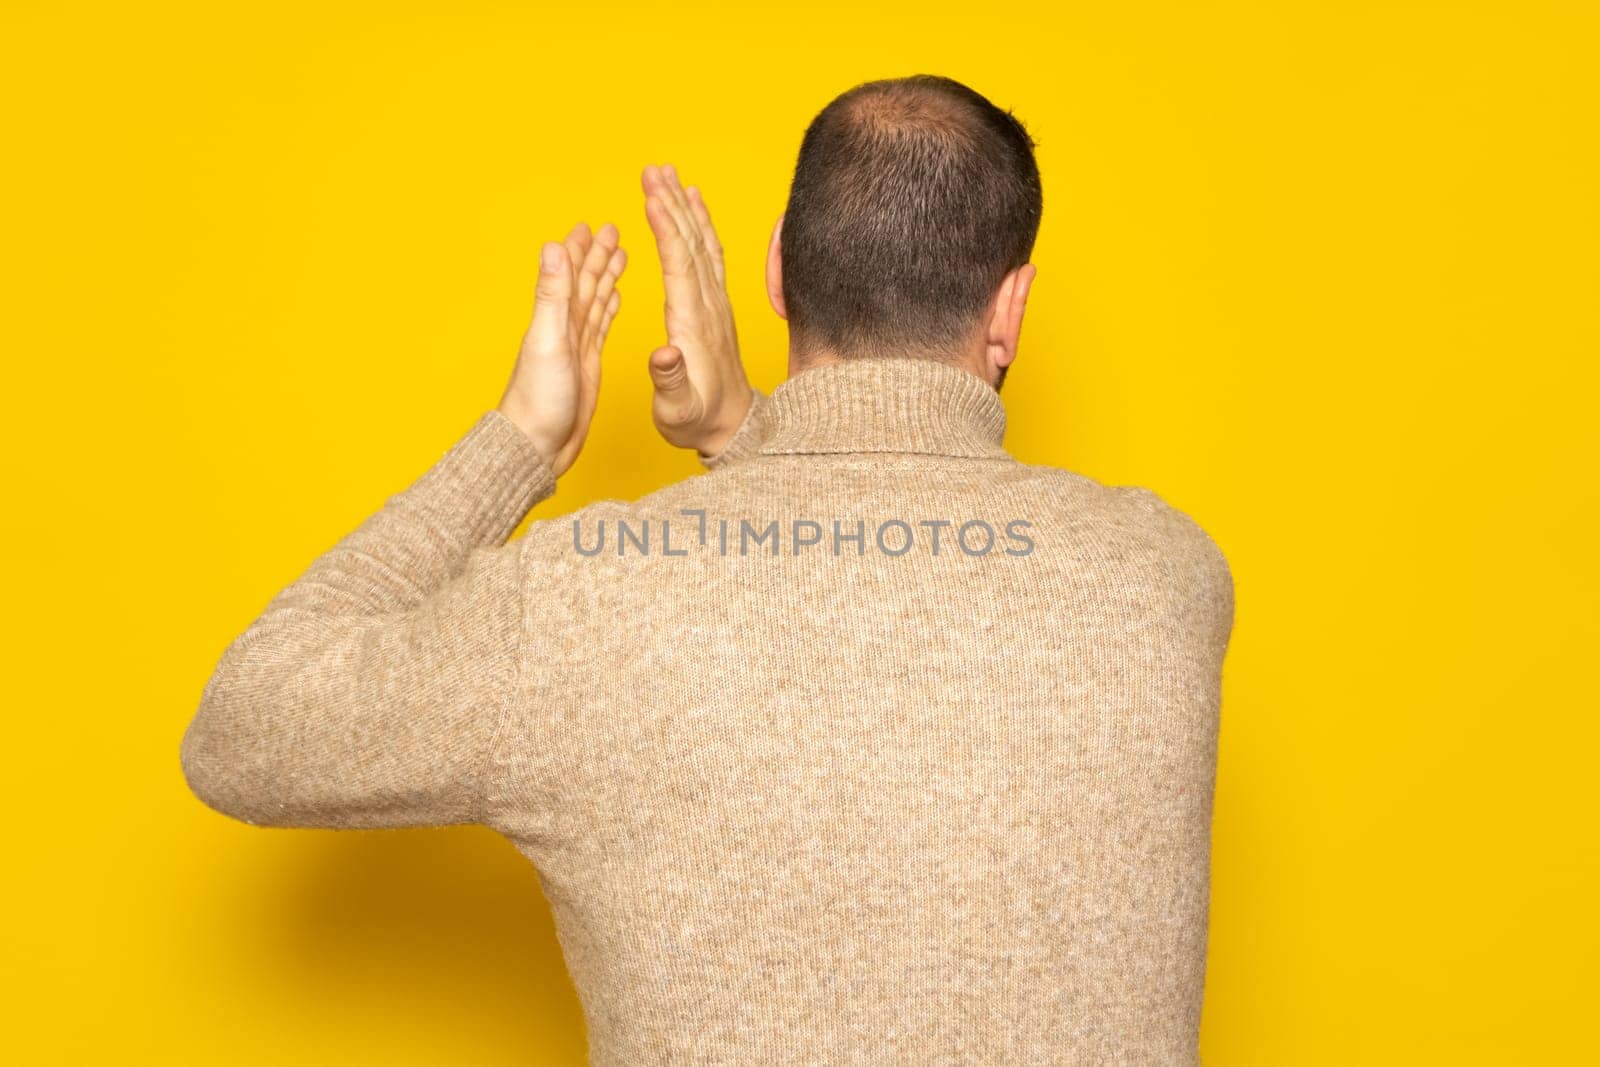 Man with alopecia problem energetically patting his back, excited by the spectacle he has just witnessed. Isolated on yellow background by Barriolo82